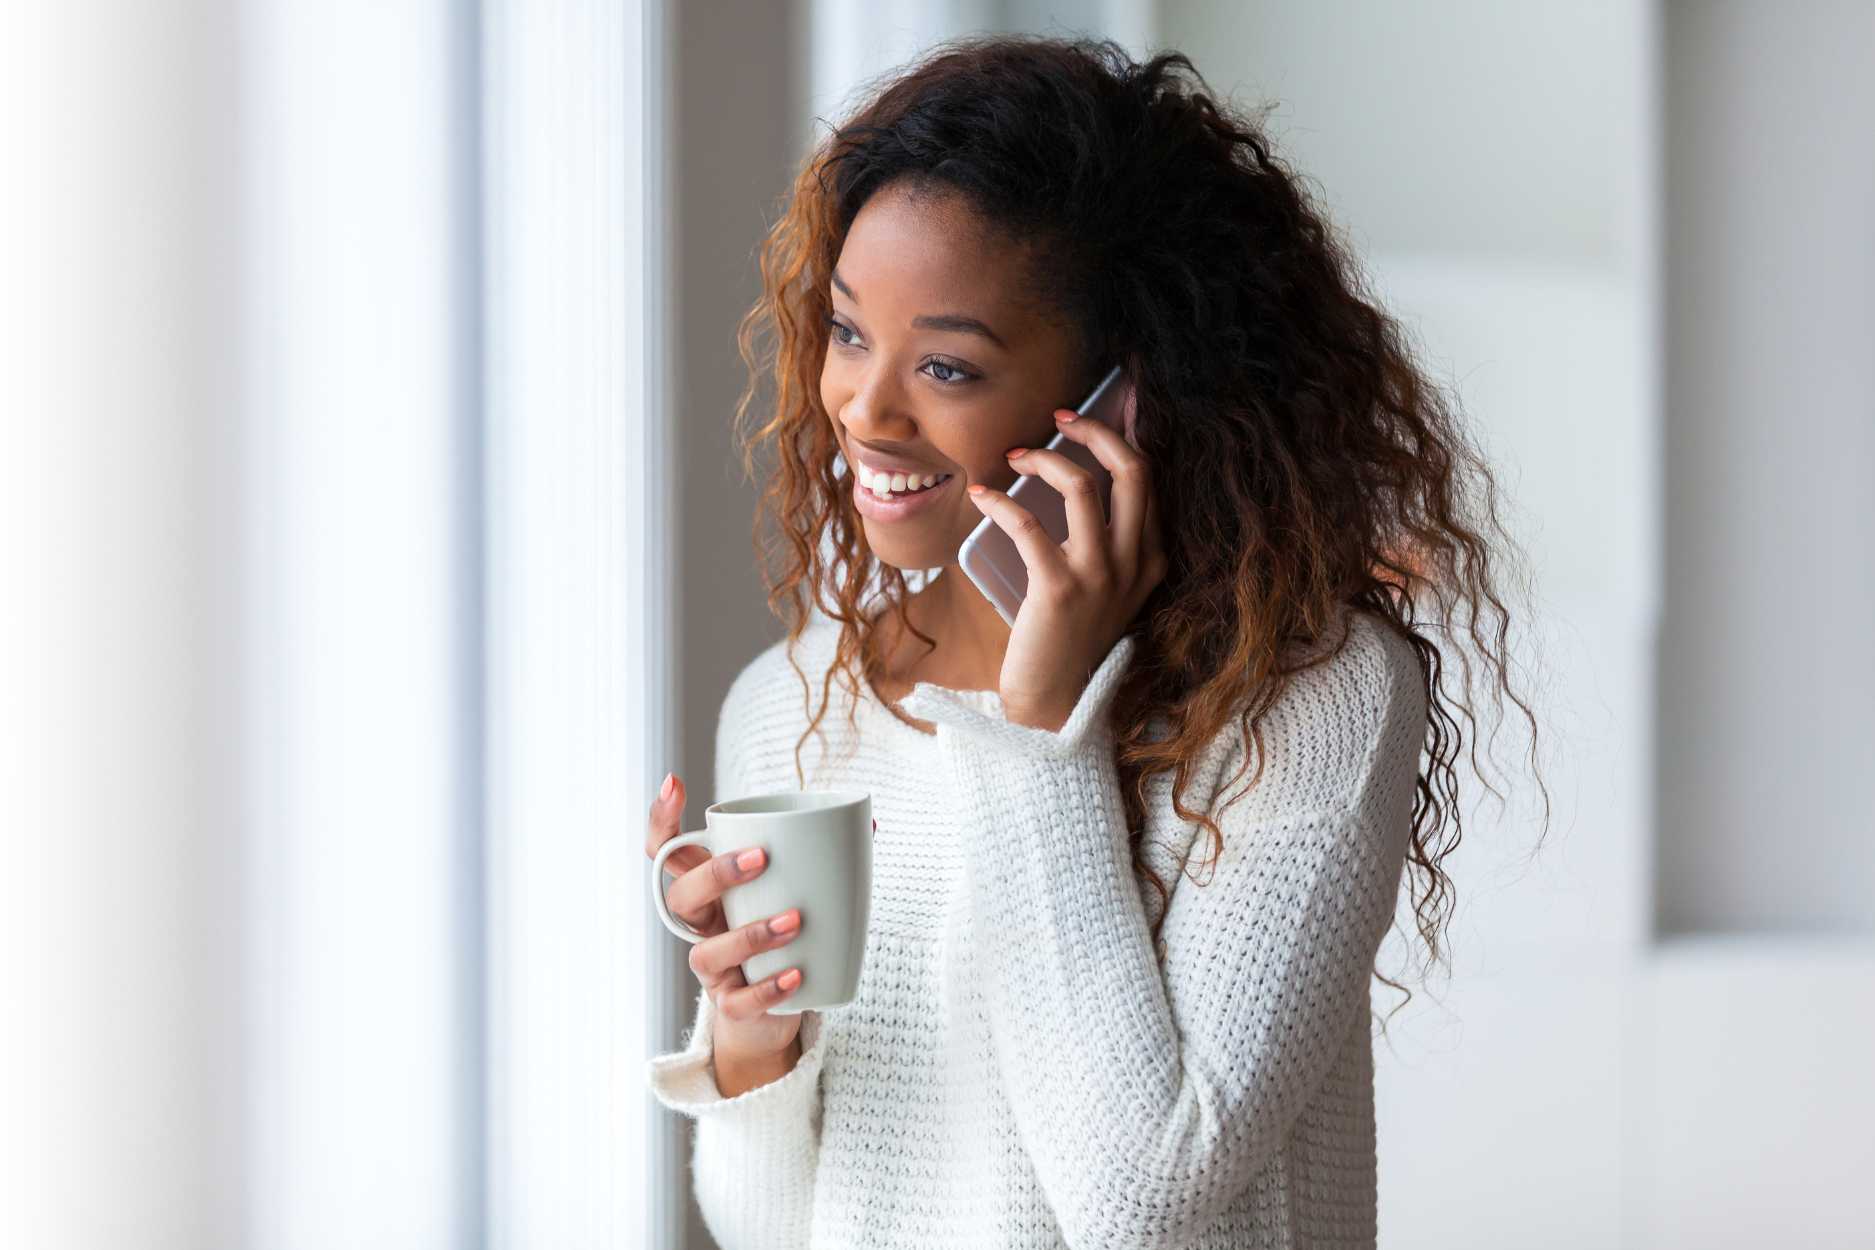 Happy Black woman on the phone with Rowan Center for Behavioral Medicine Scheduling her consult while holding a coffee. She's wearing a white sweater.